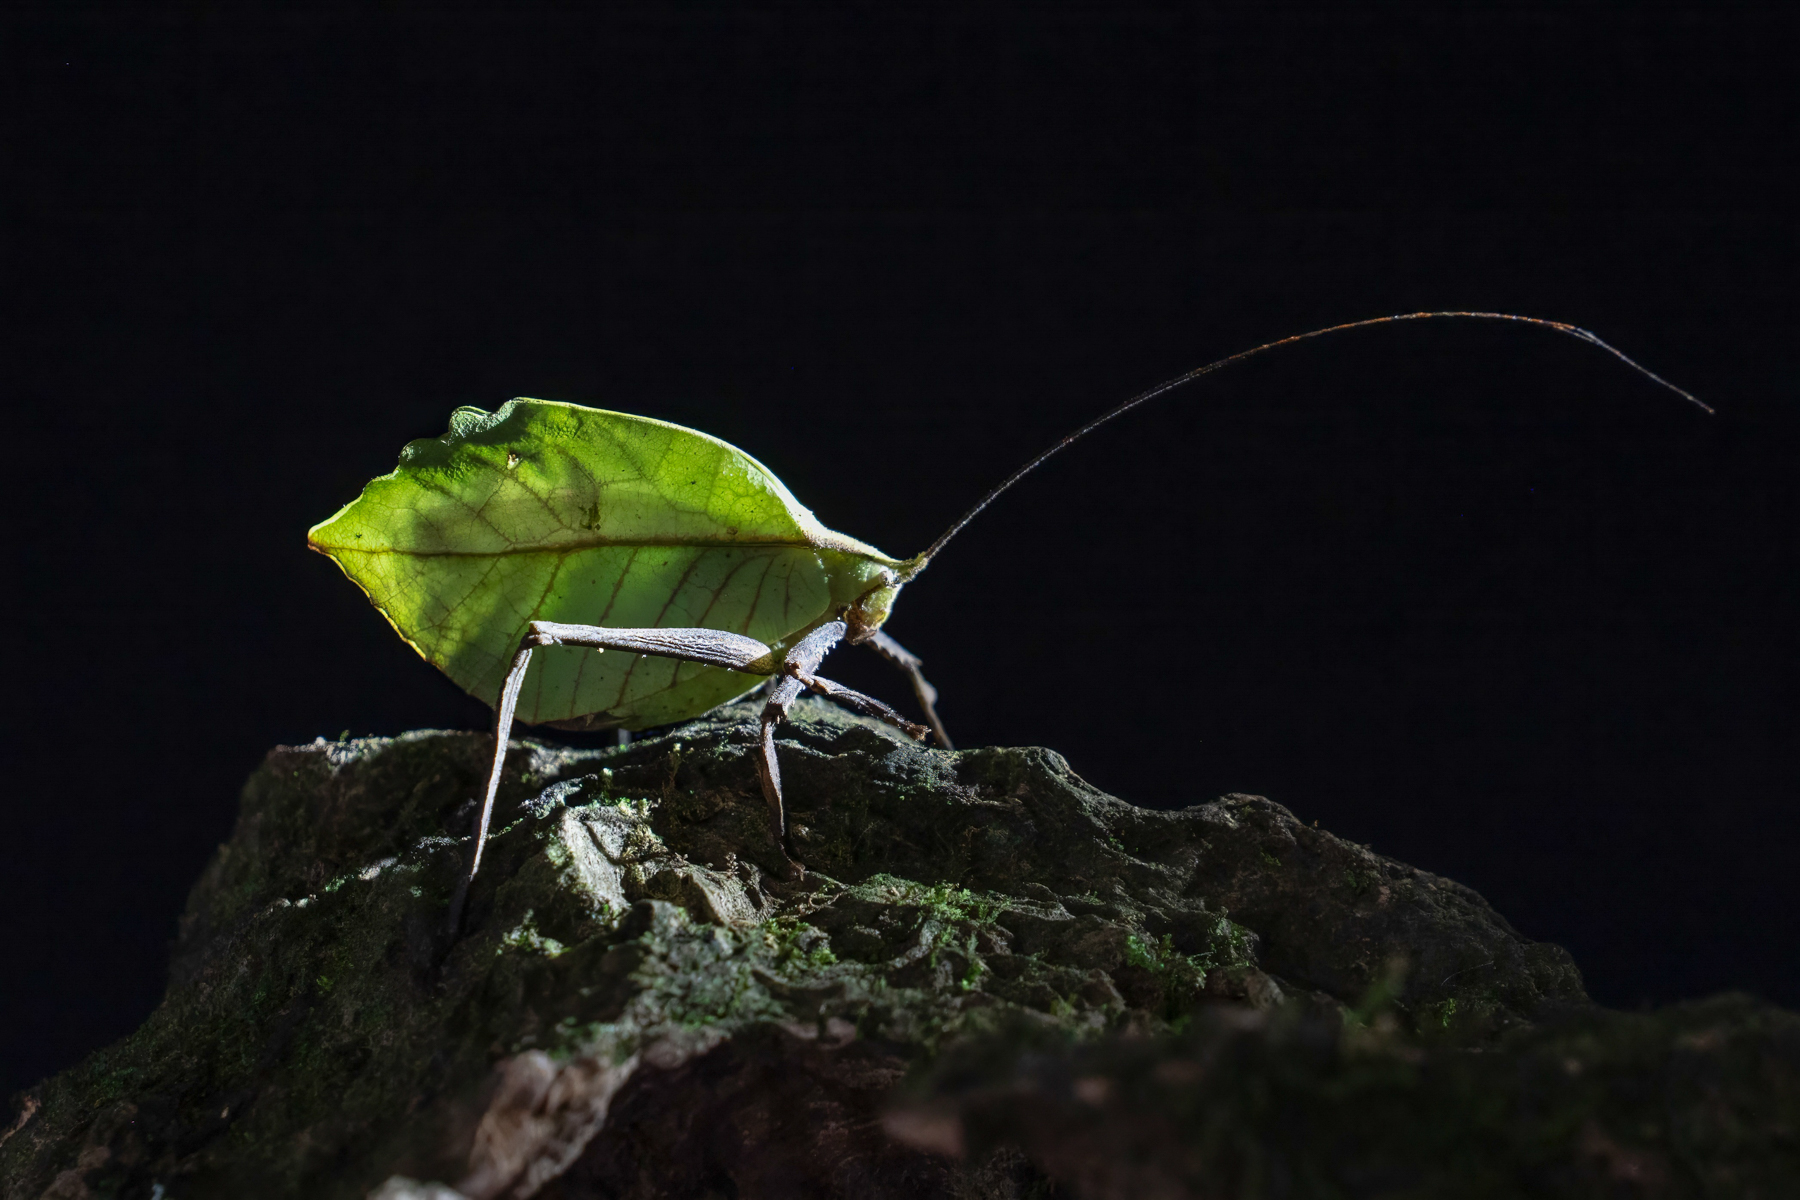 Costa Rica's rainforests are filled with the wildest insects that camouflage themselves as leaves like this Crenulata Sylvan Leaf Katydid (image by Inger Vandyke)